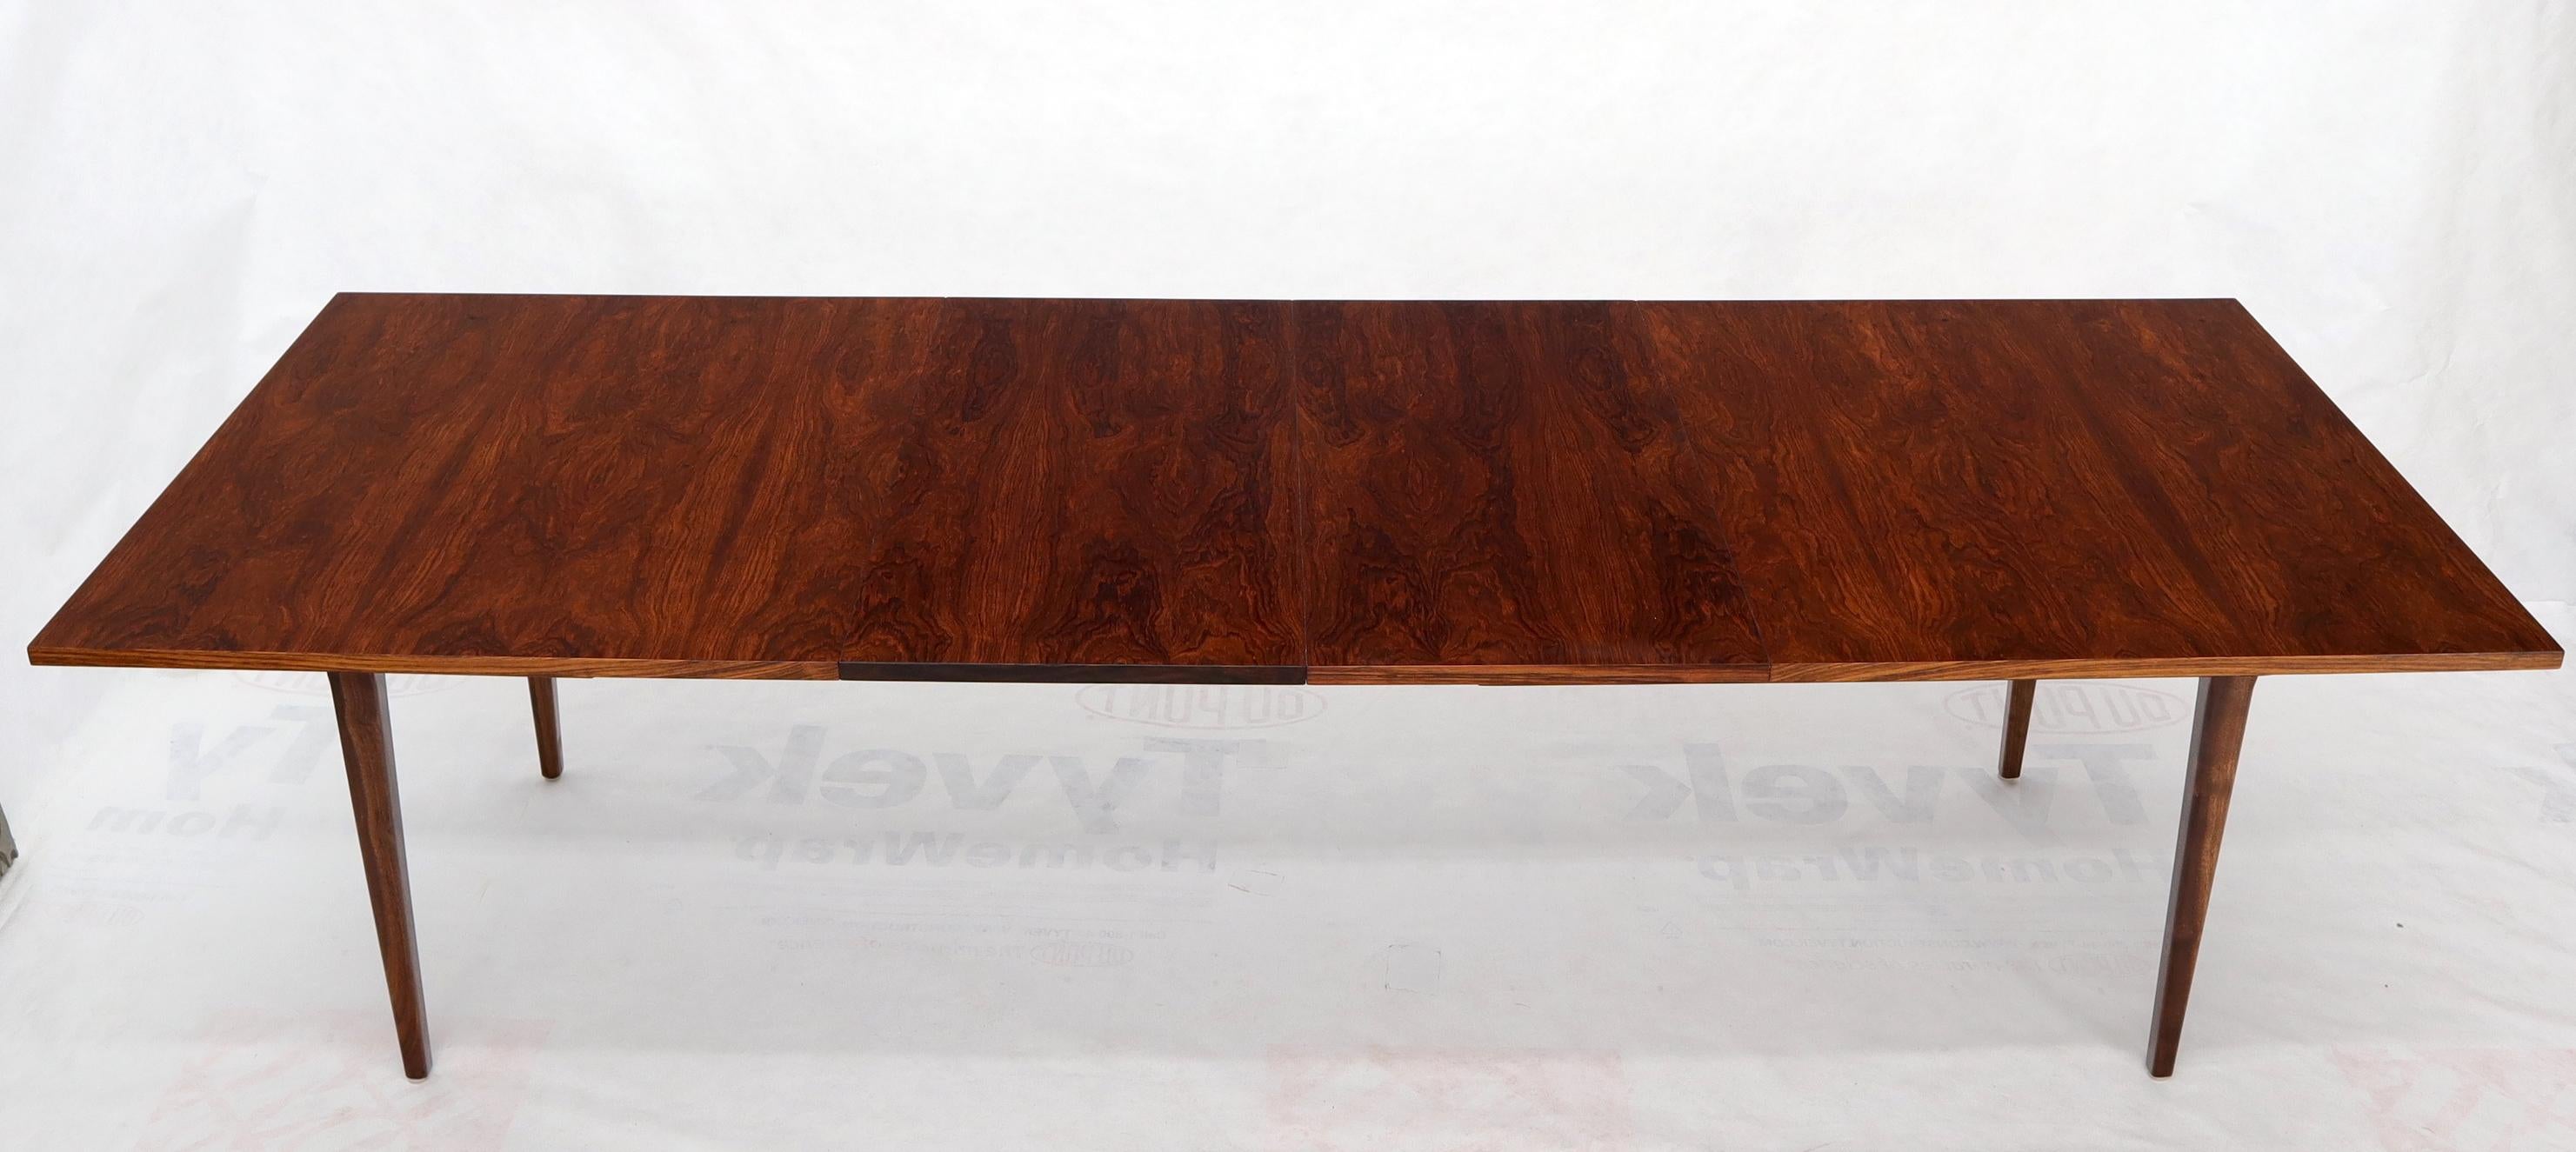 Rosewood Rectangular Dining Table by George Nelson for Herman Miller 2 Leaves For Sale 1